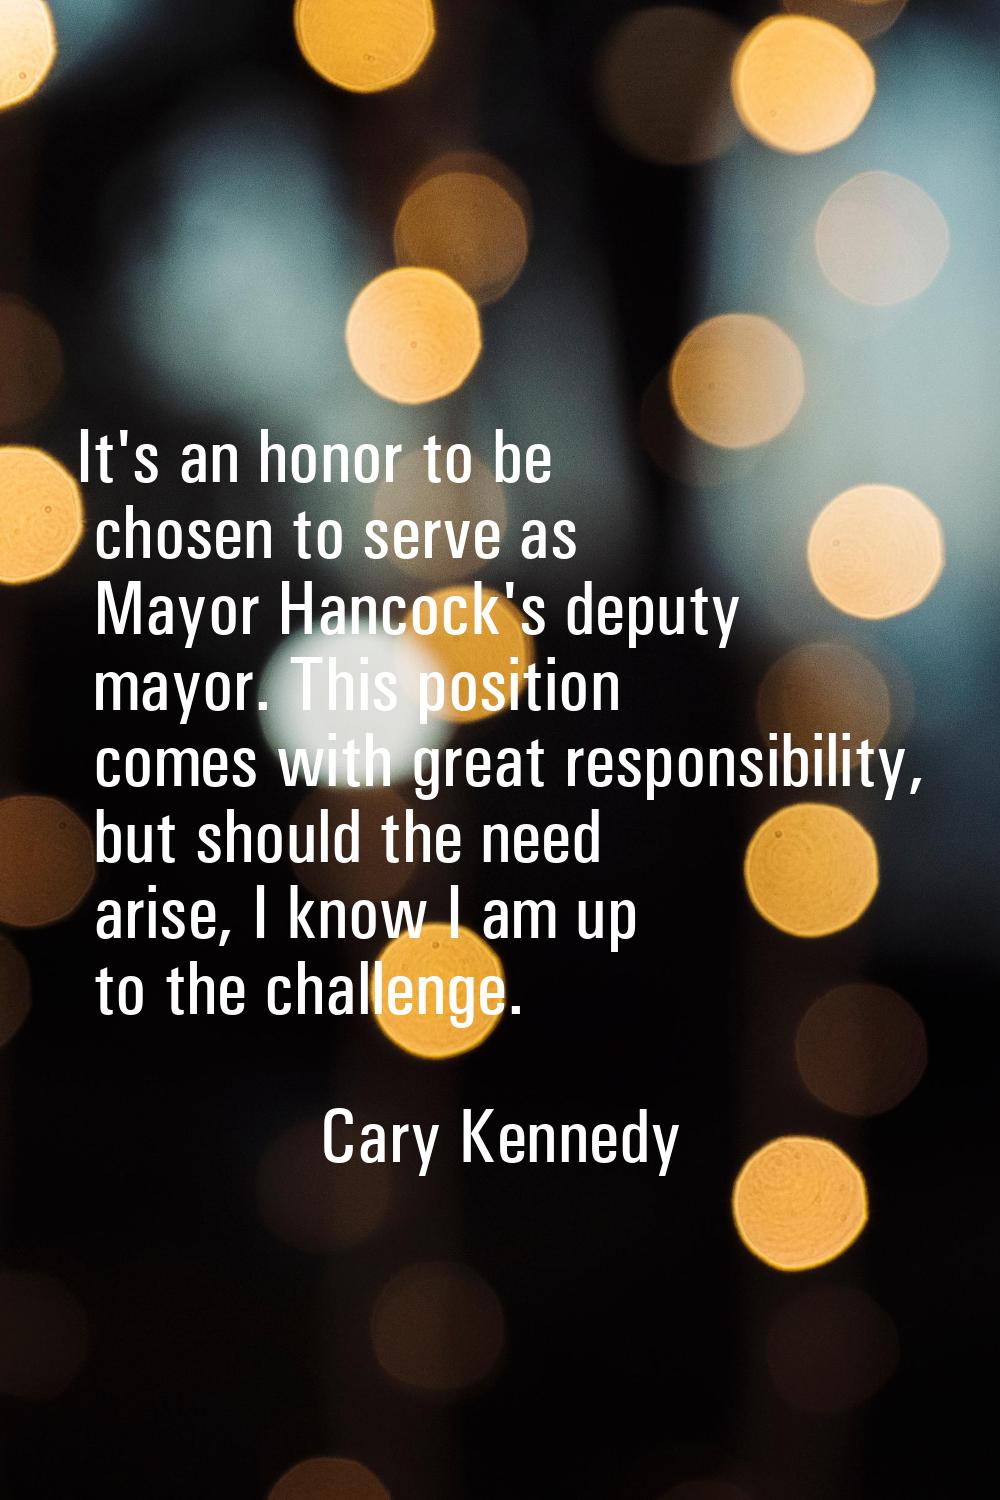 It's an honor to be chosen to serve as Mayor Hancock's deputy mayor. This position comes with great